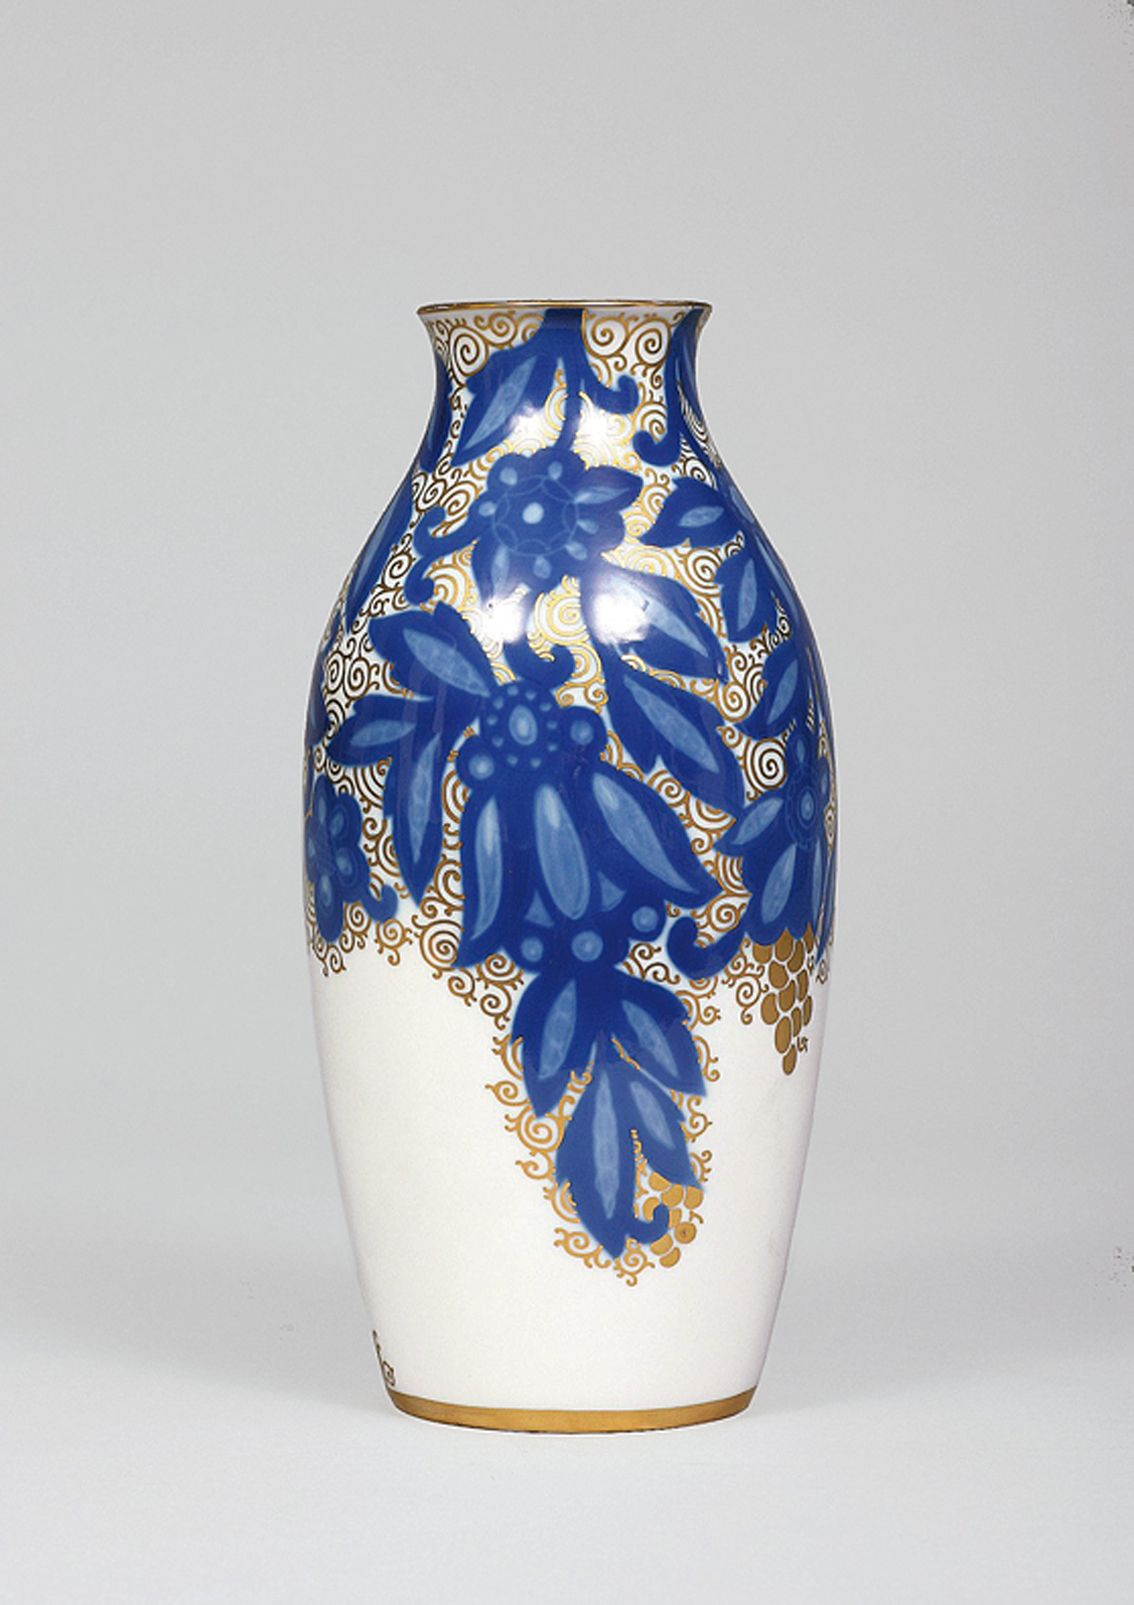 A vase decorated with 'Rosari' patterns